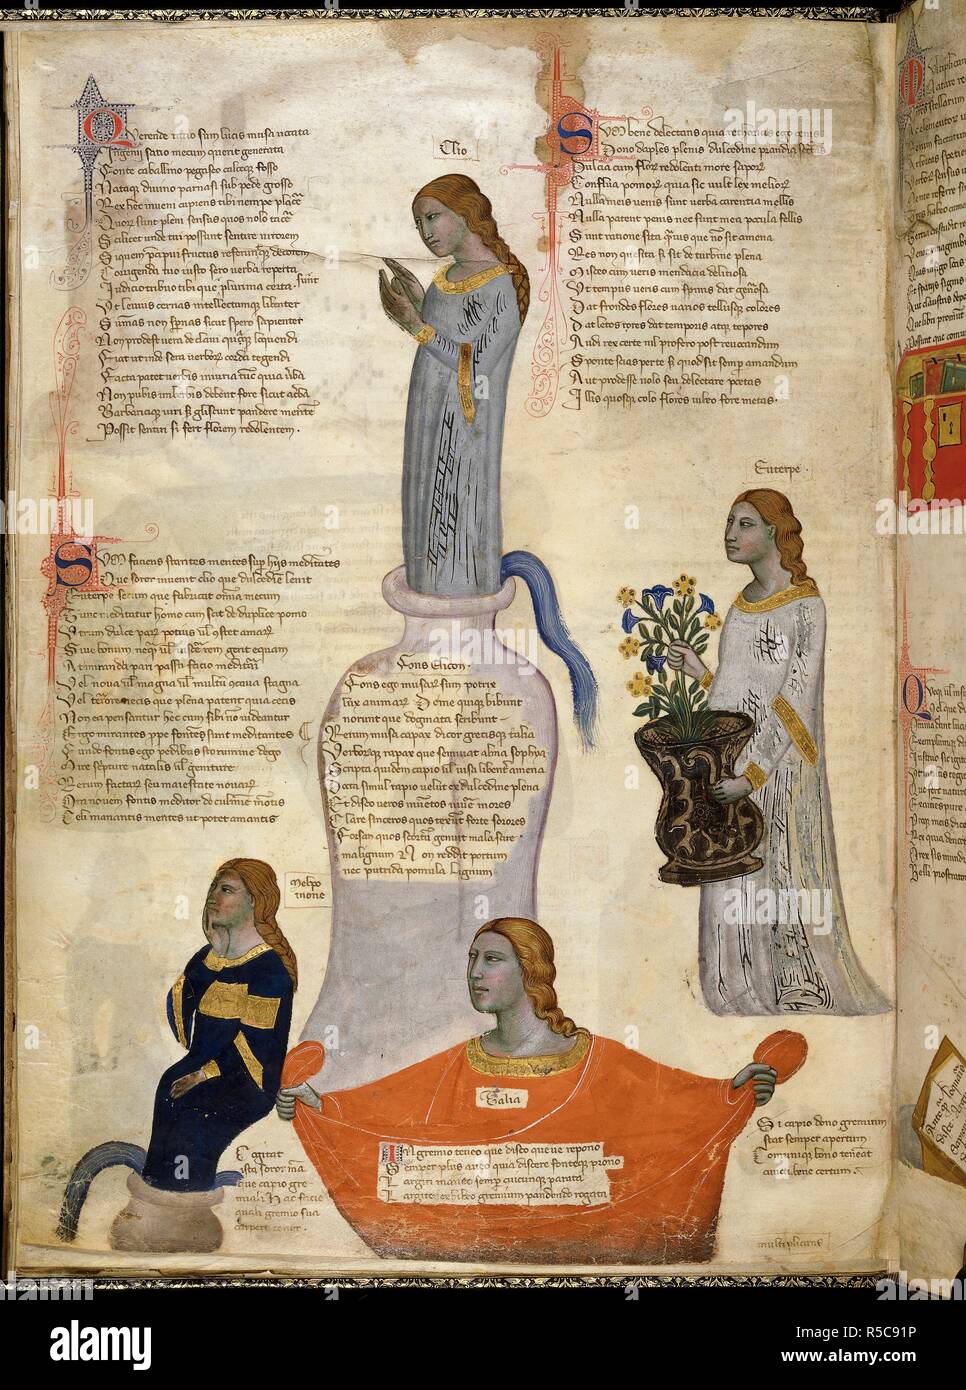 Miniature of Four Muses: Clio (history), Melpomene (tragedy), Euterpe  (music) and Thalia (comedy). Address in verse to Robert of Anjou, King of  Naples, from the town of Prato in Tuscany (the 'Regia